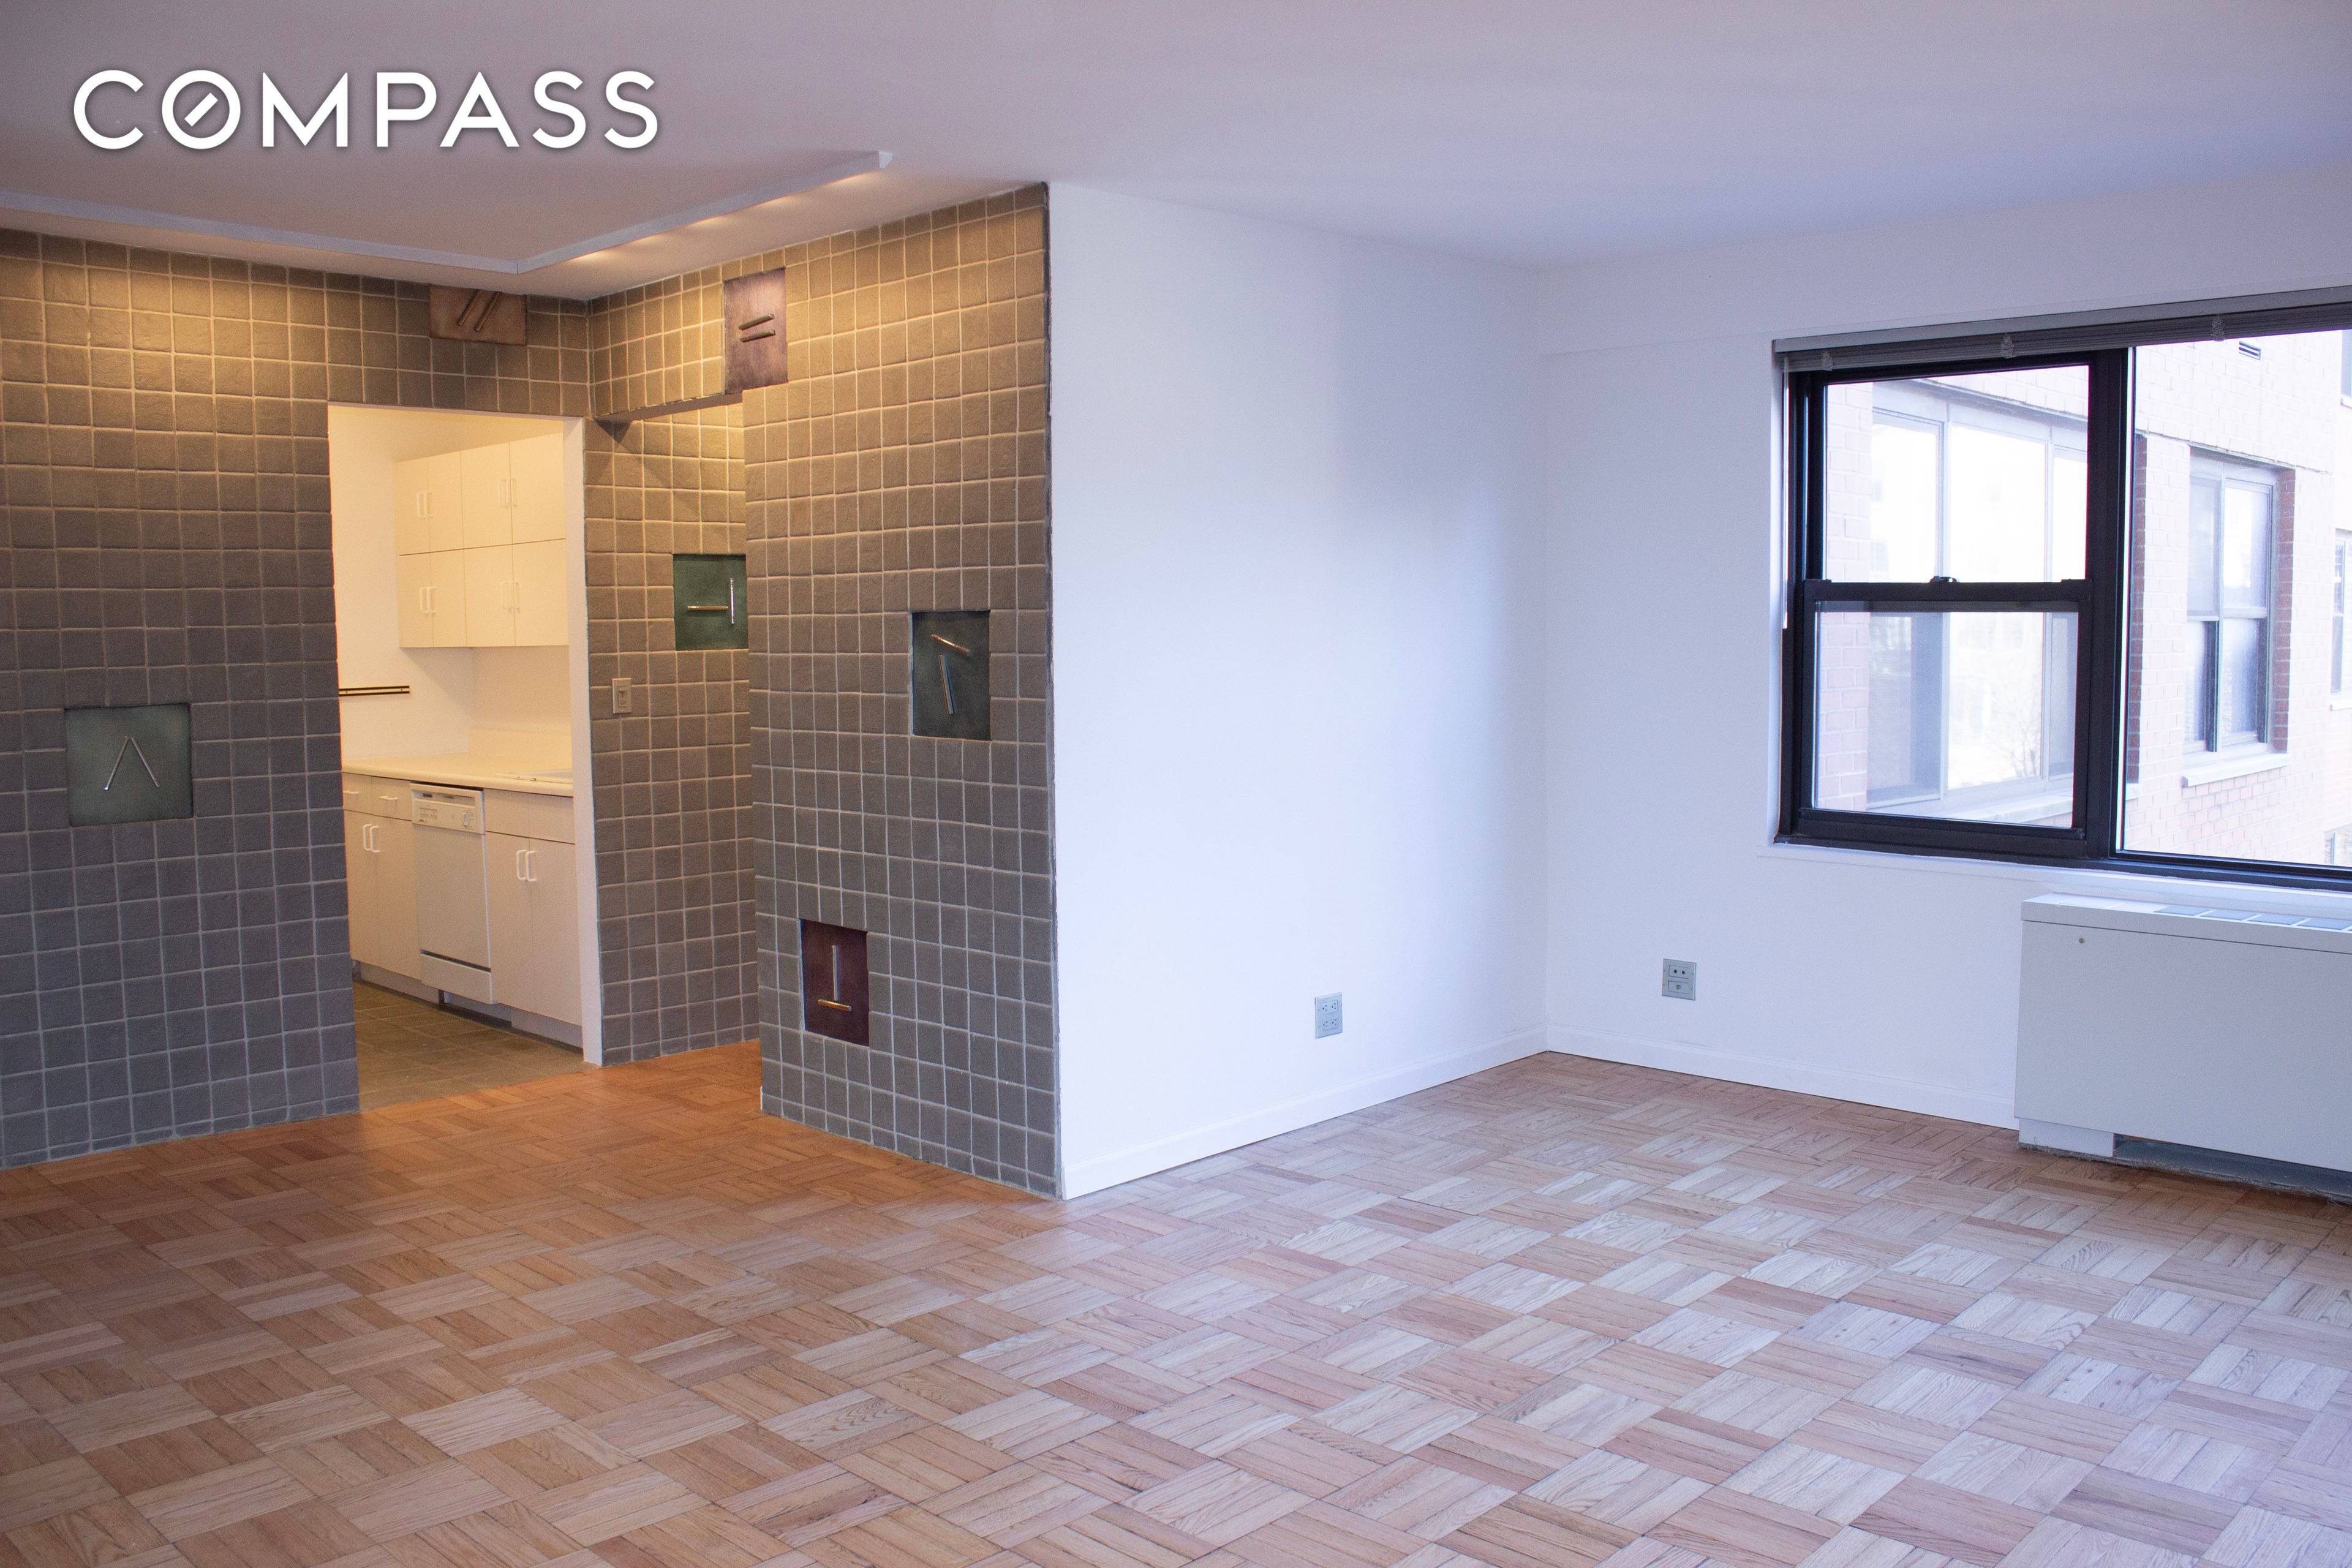 Welcome to Unit 7E. This large, one bedroom apartment is waiting for your personal touch.